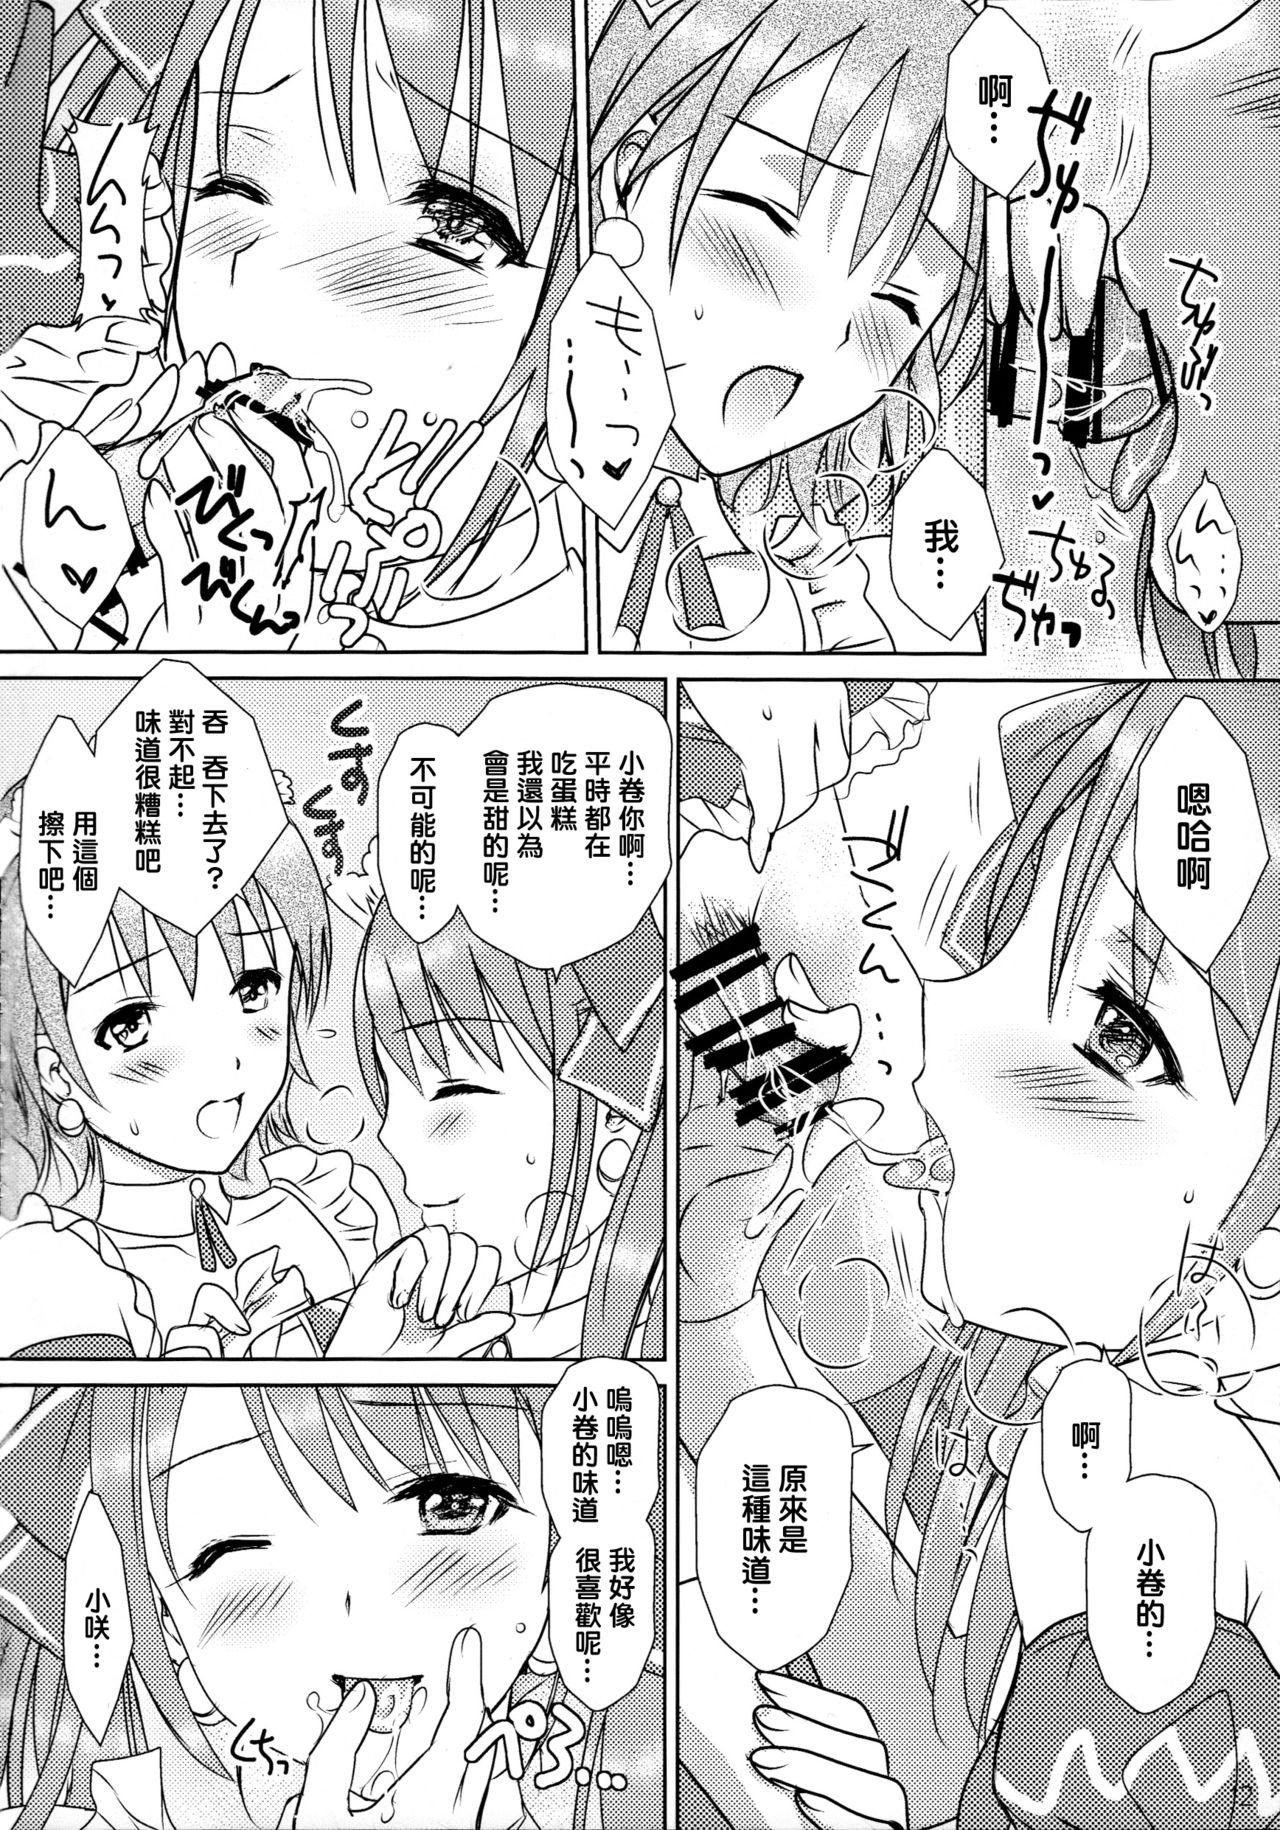 Les You're my special sweetest cake! - The idolmaster Scene - Page 12